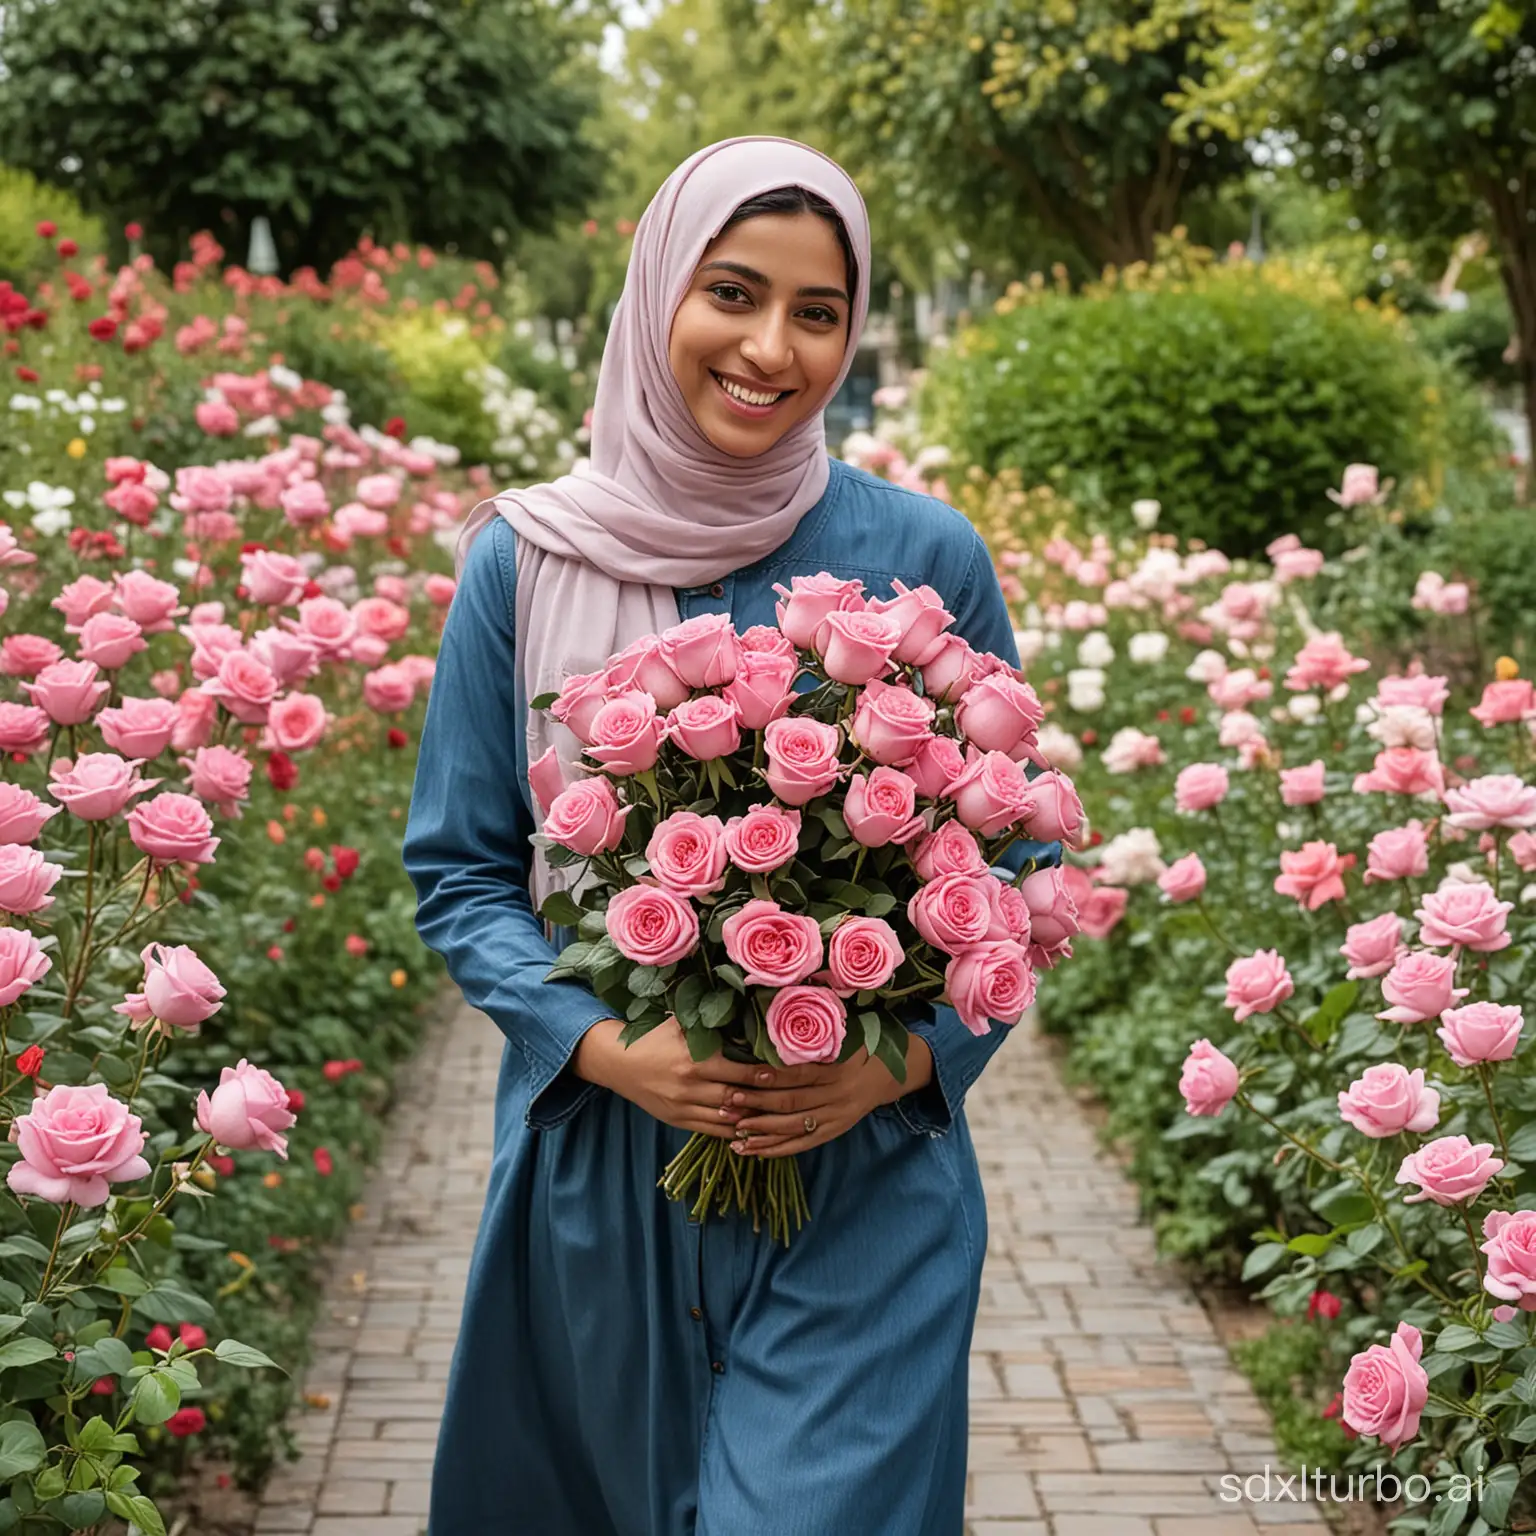 Smiling-Muslim-Woman-Strolling-Through-Colorful-Flower-Garden-with-Pink-Roses